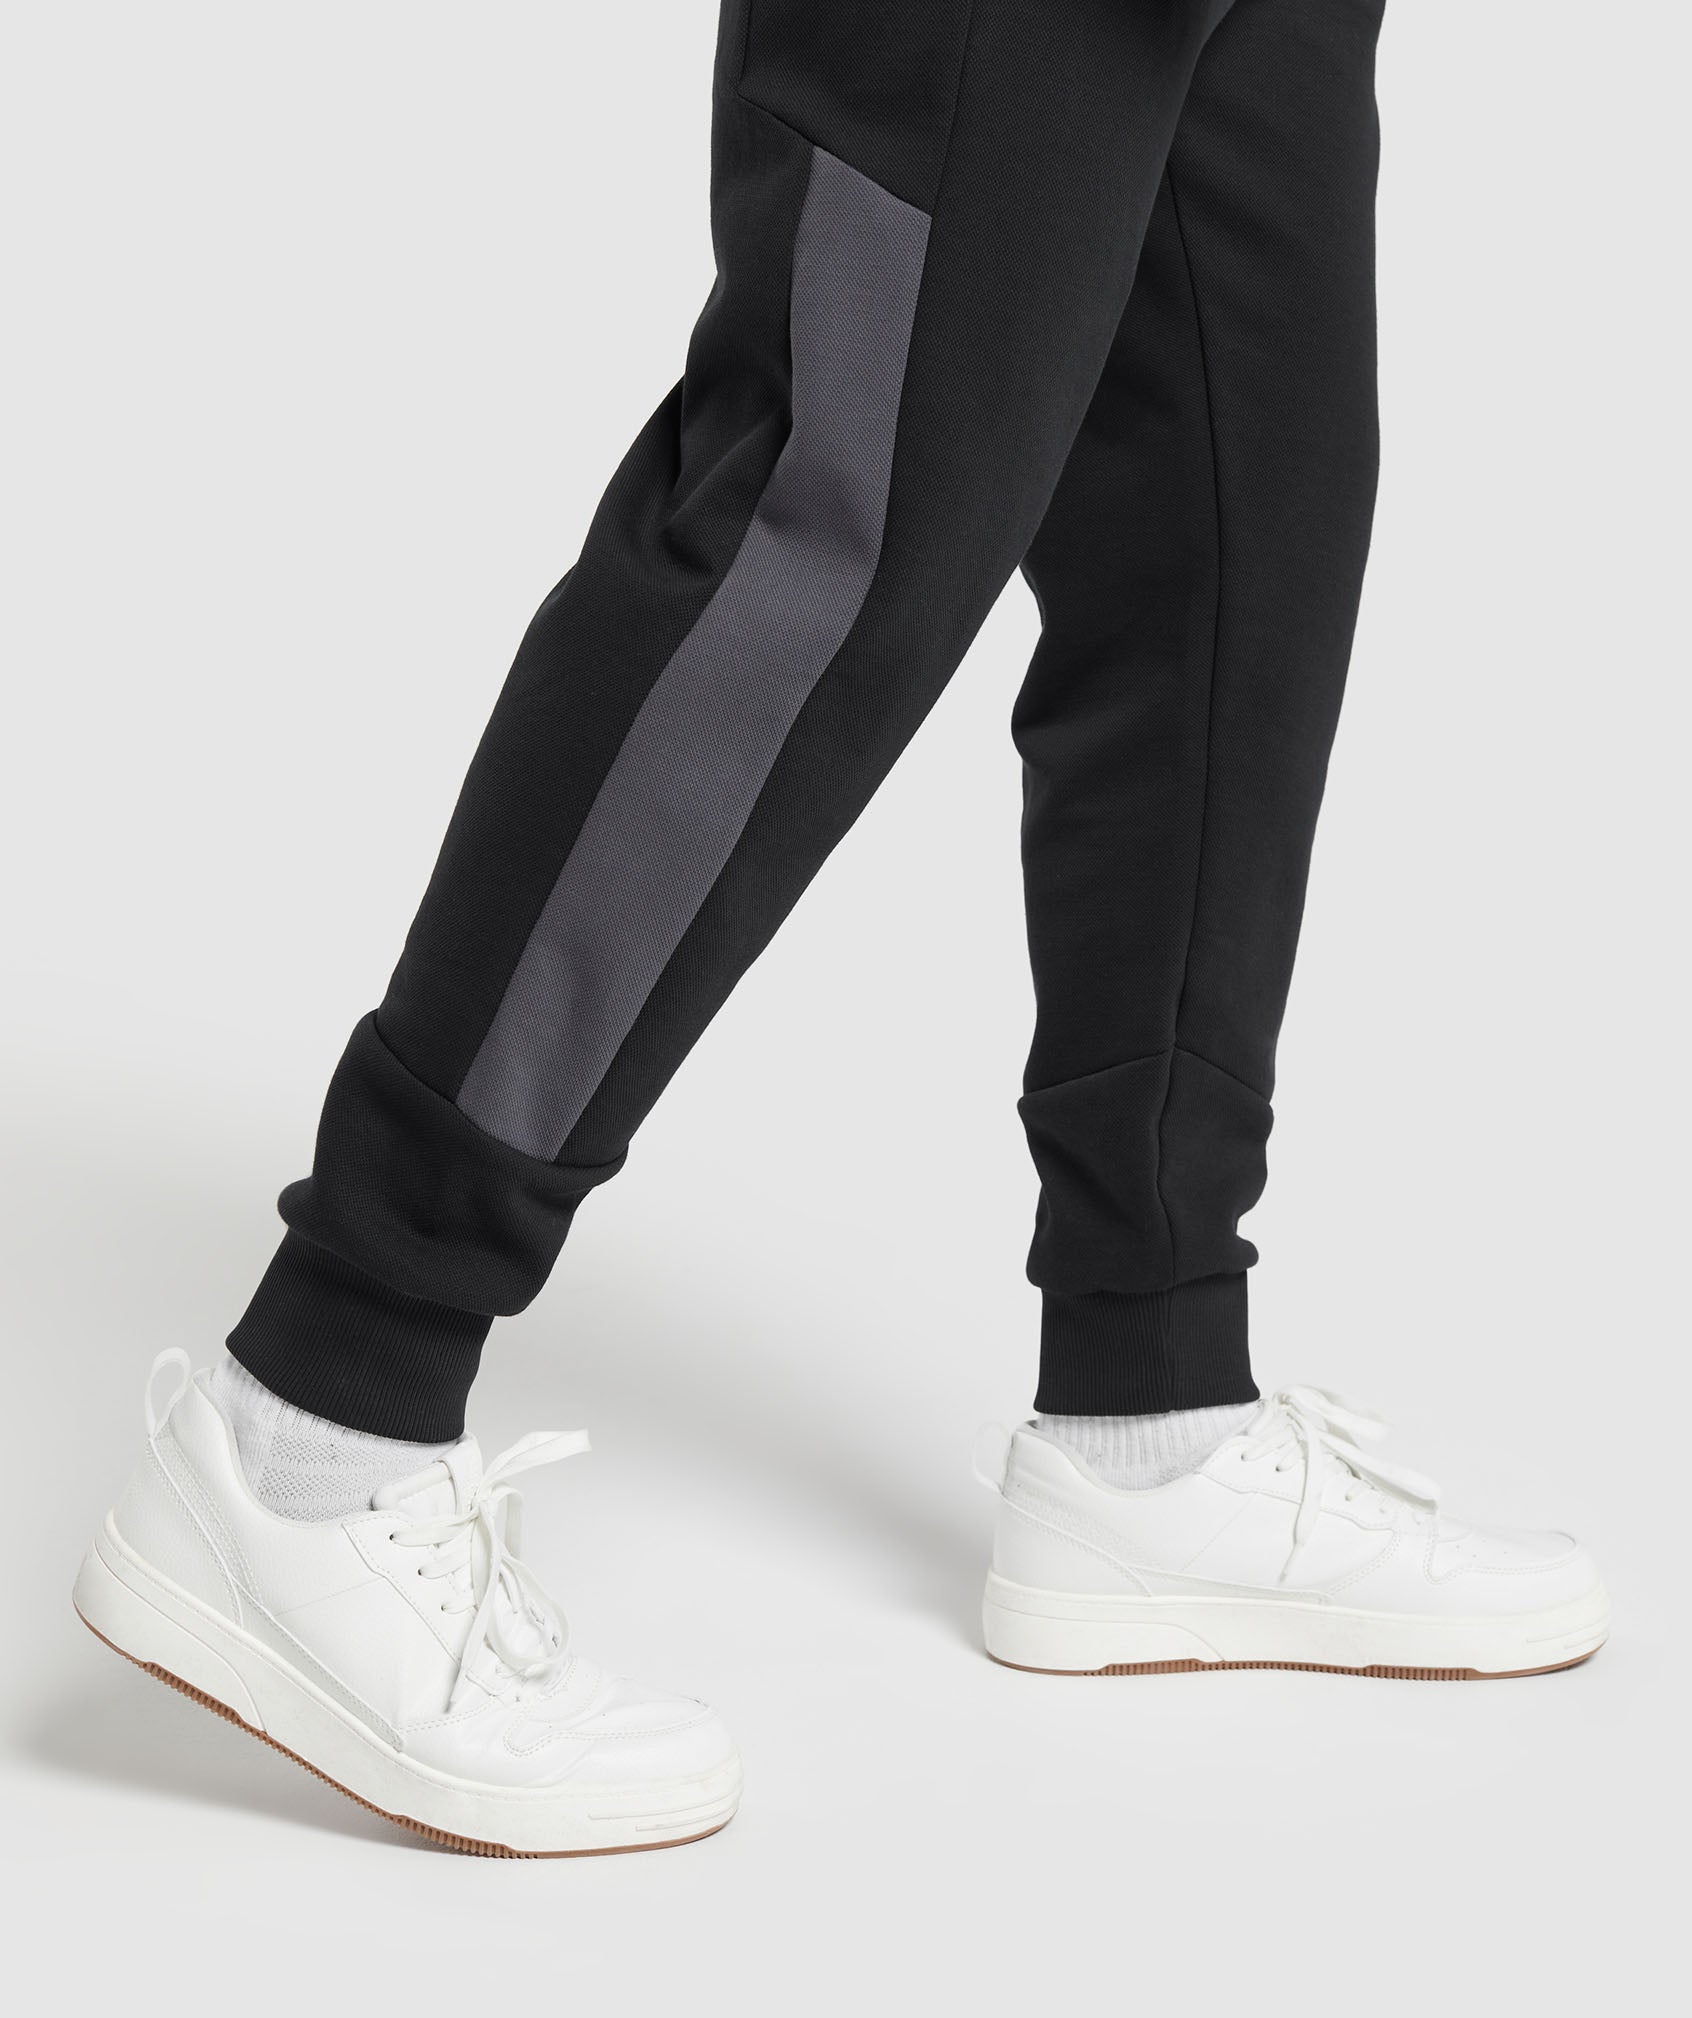 Pique Joggers in Black/Onyx Grey - view 5